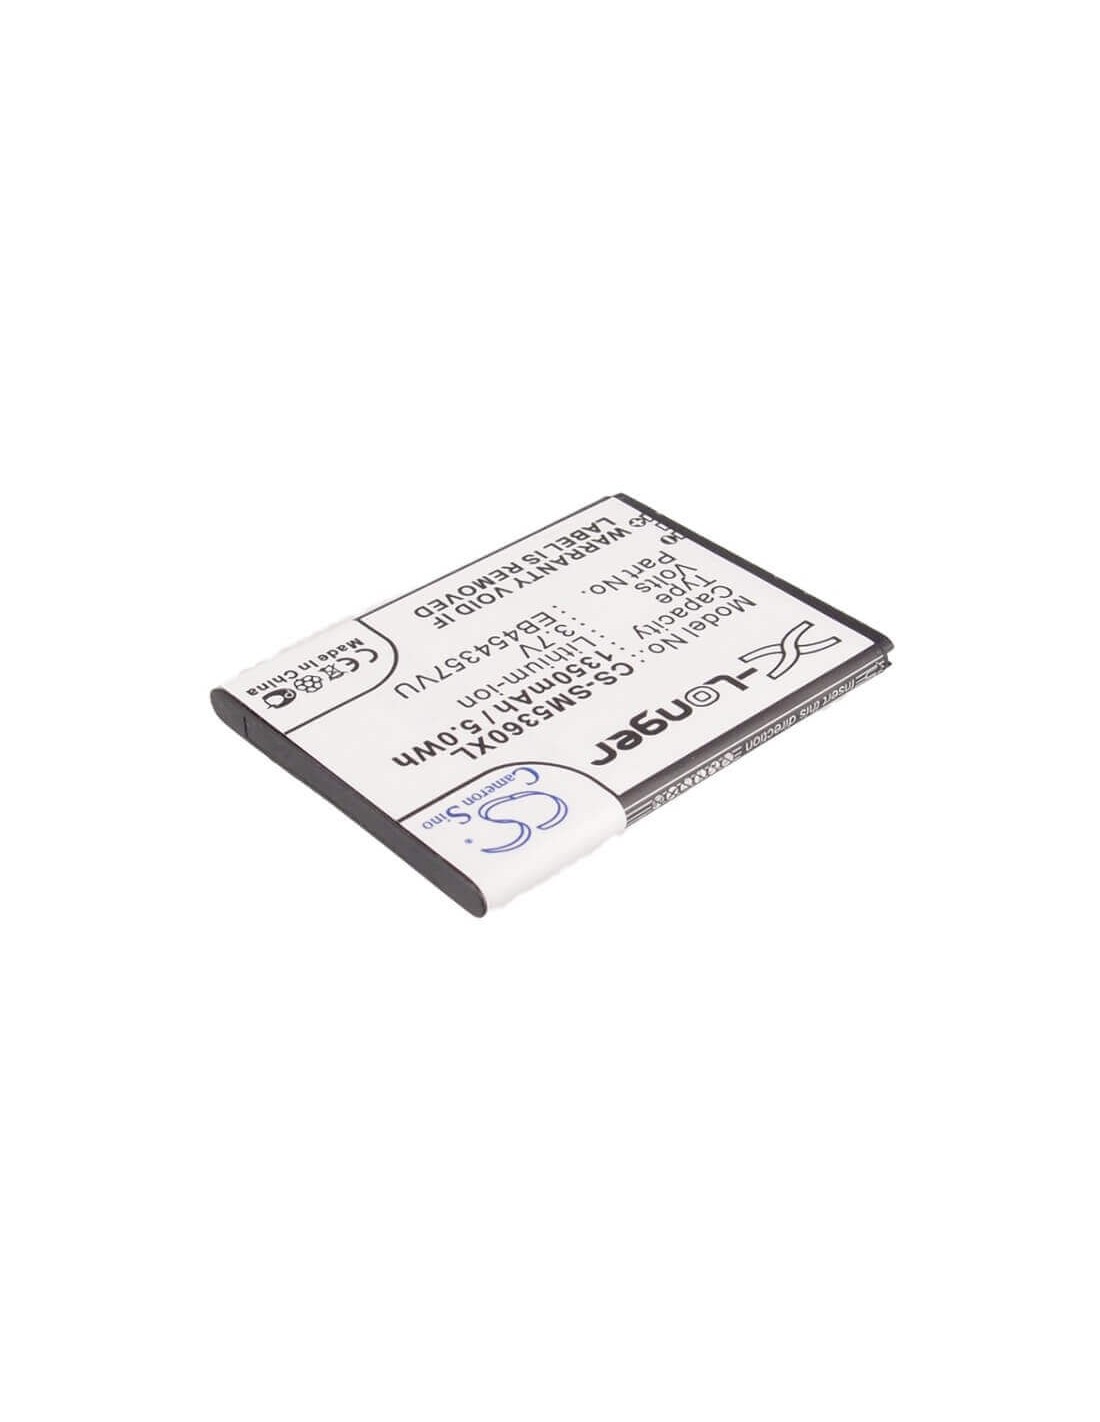 Battery for Samsung GT-S5360, Galaxy Y, GT-S5380 3.7V, 1350mAh - 5.00Wh